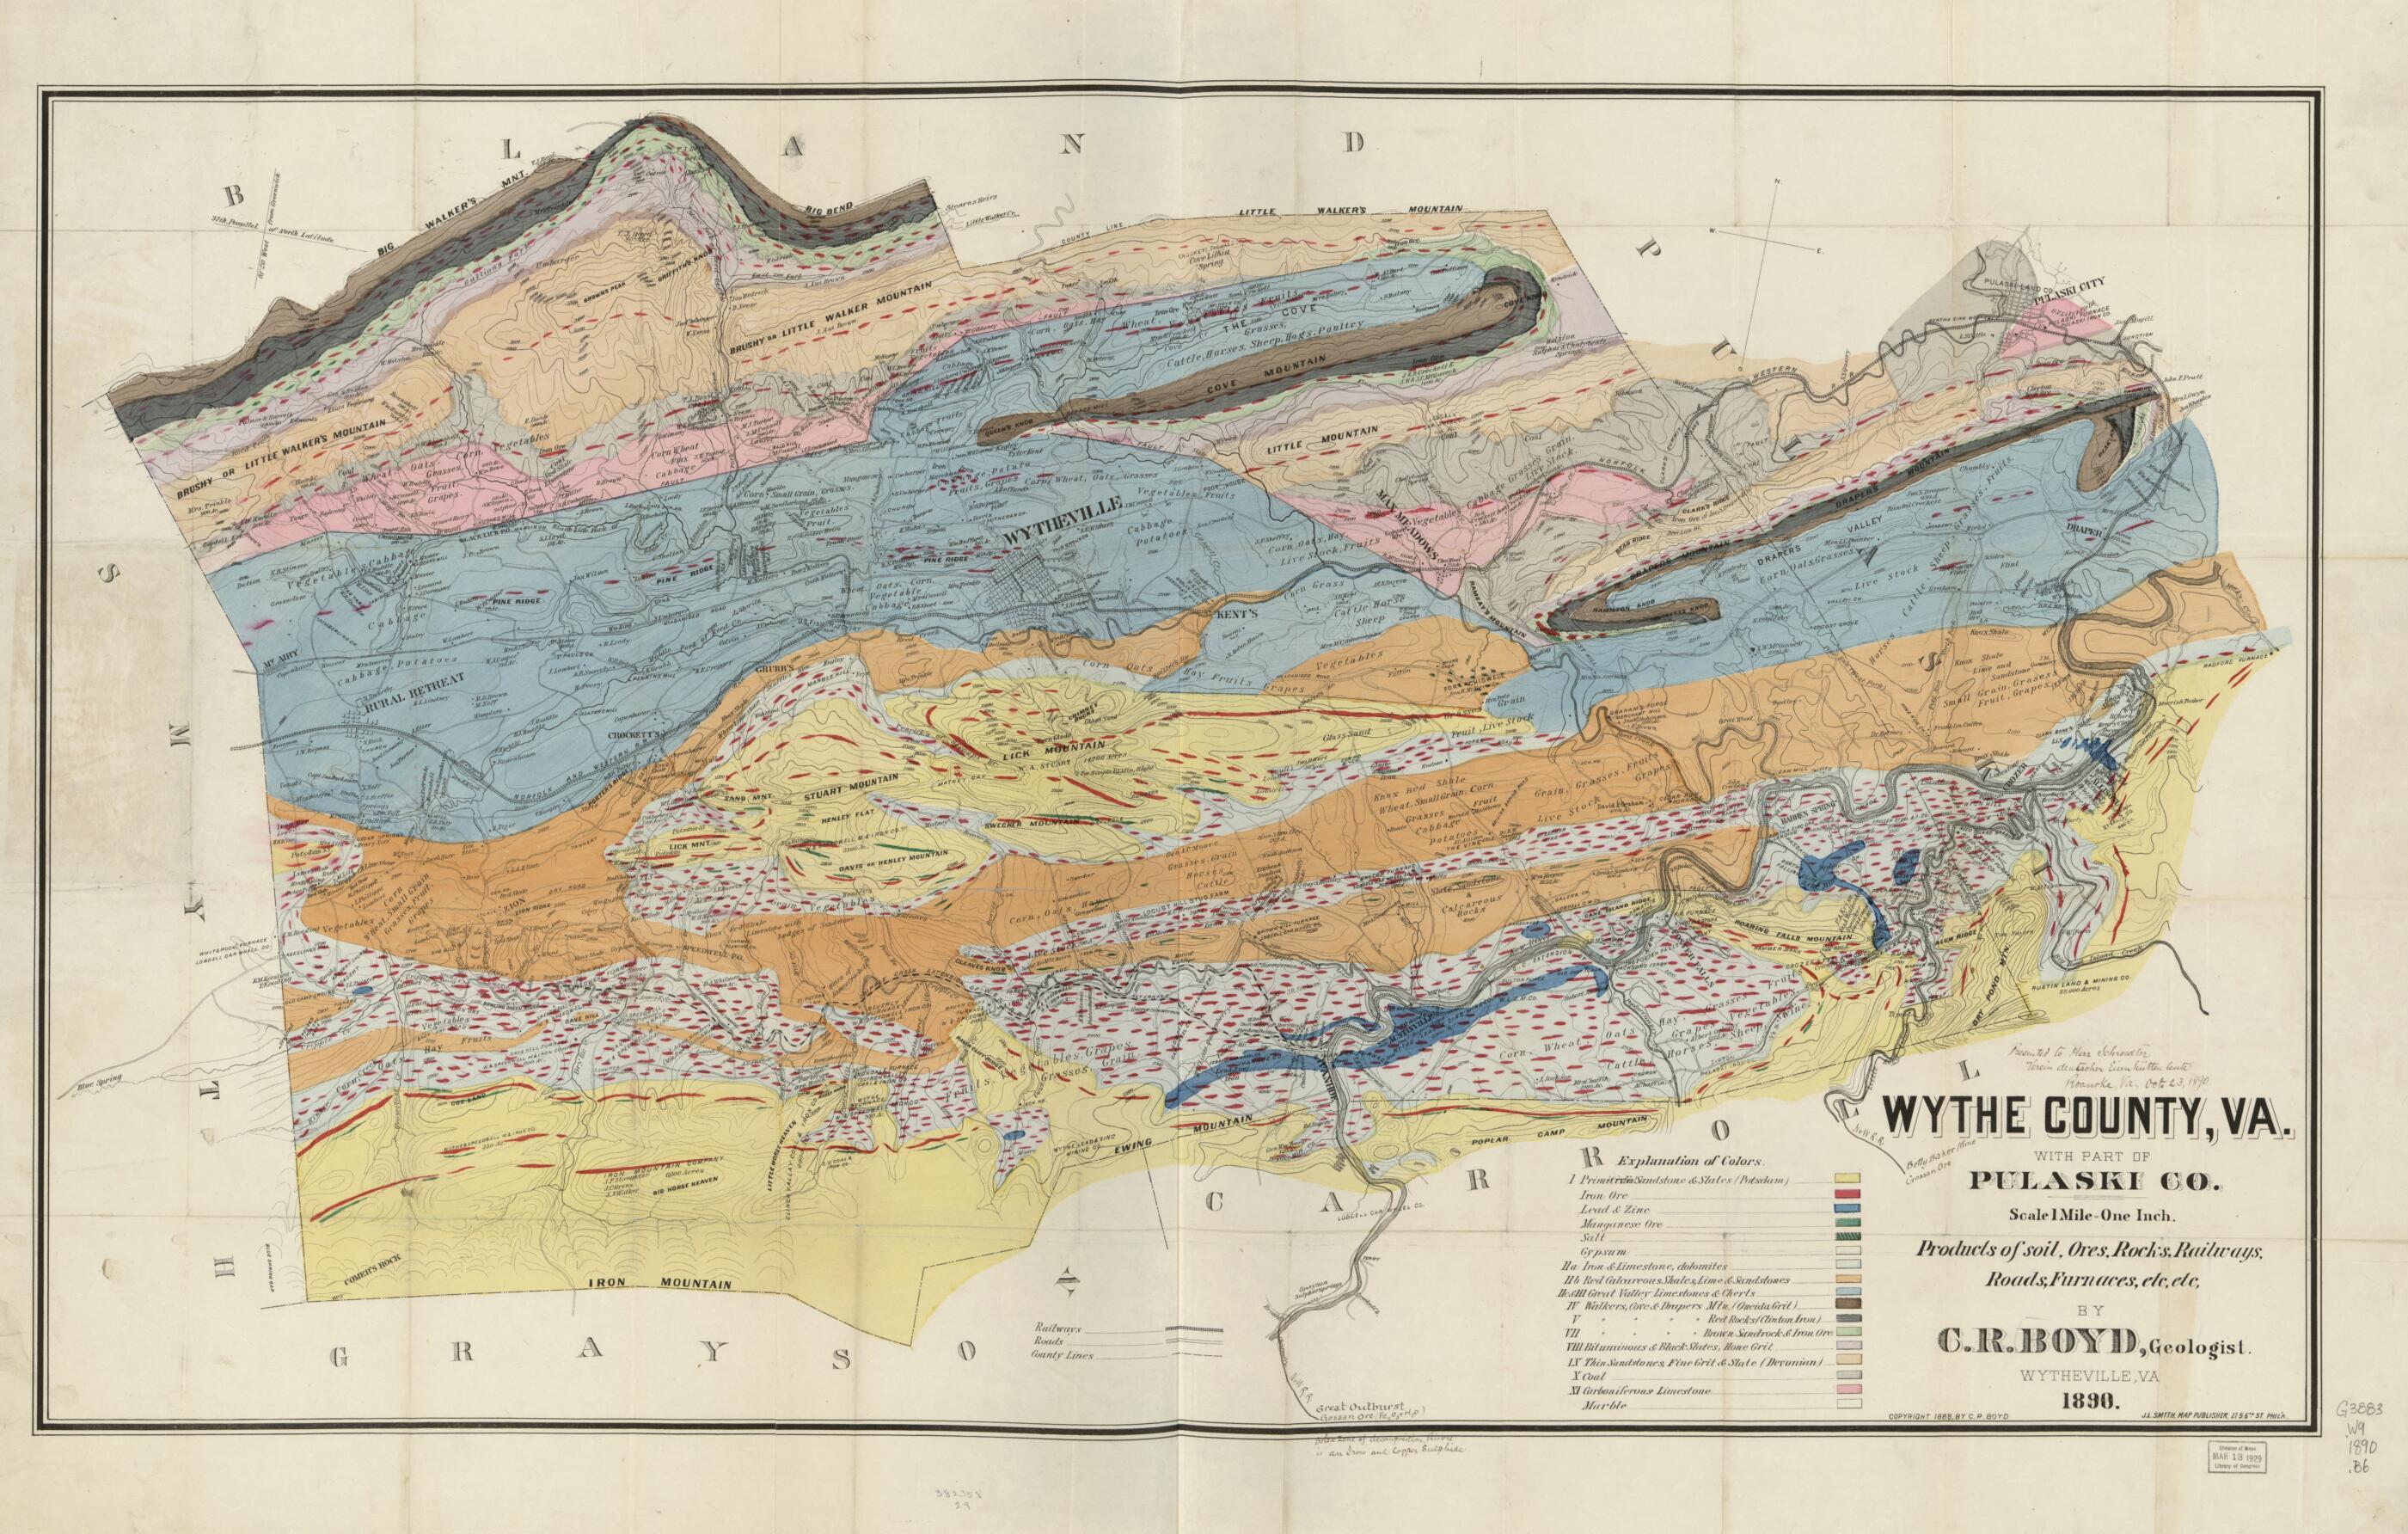 This old map of Wythe County, Va. With Part of Pulaski Co. : Products of Soil, Ores, Rocks, Railways, Roads, Furnaces, Etc., Etc. (Wythe County, Virginia With Part of Pulaski County) from 1890 was created by Charles Rufus Boyd in 1890